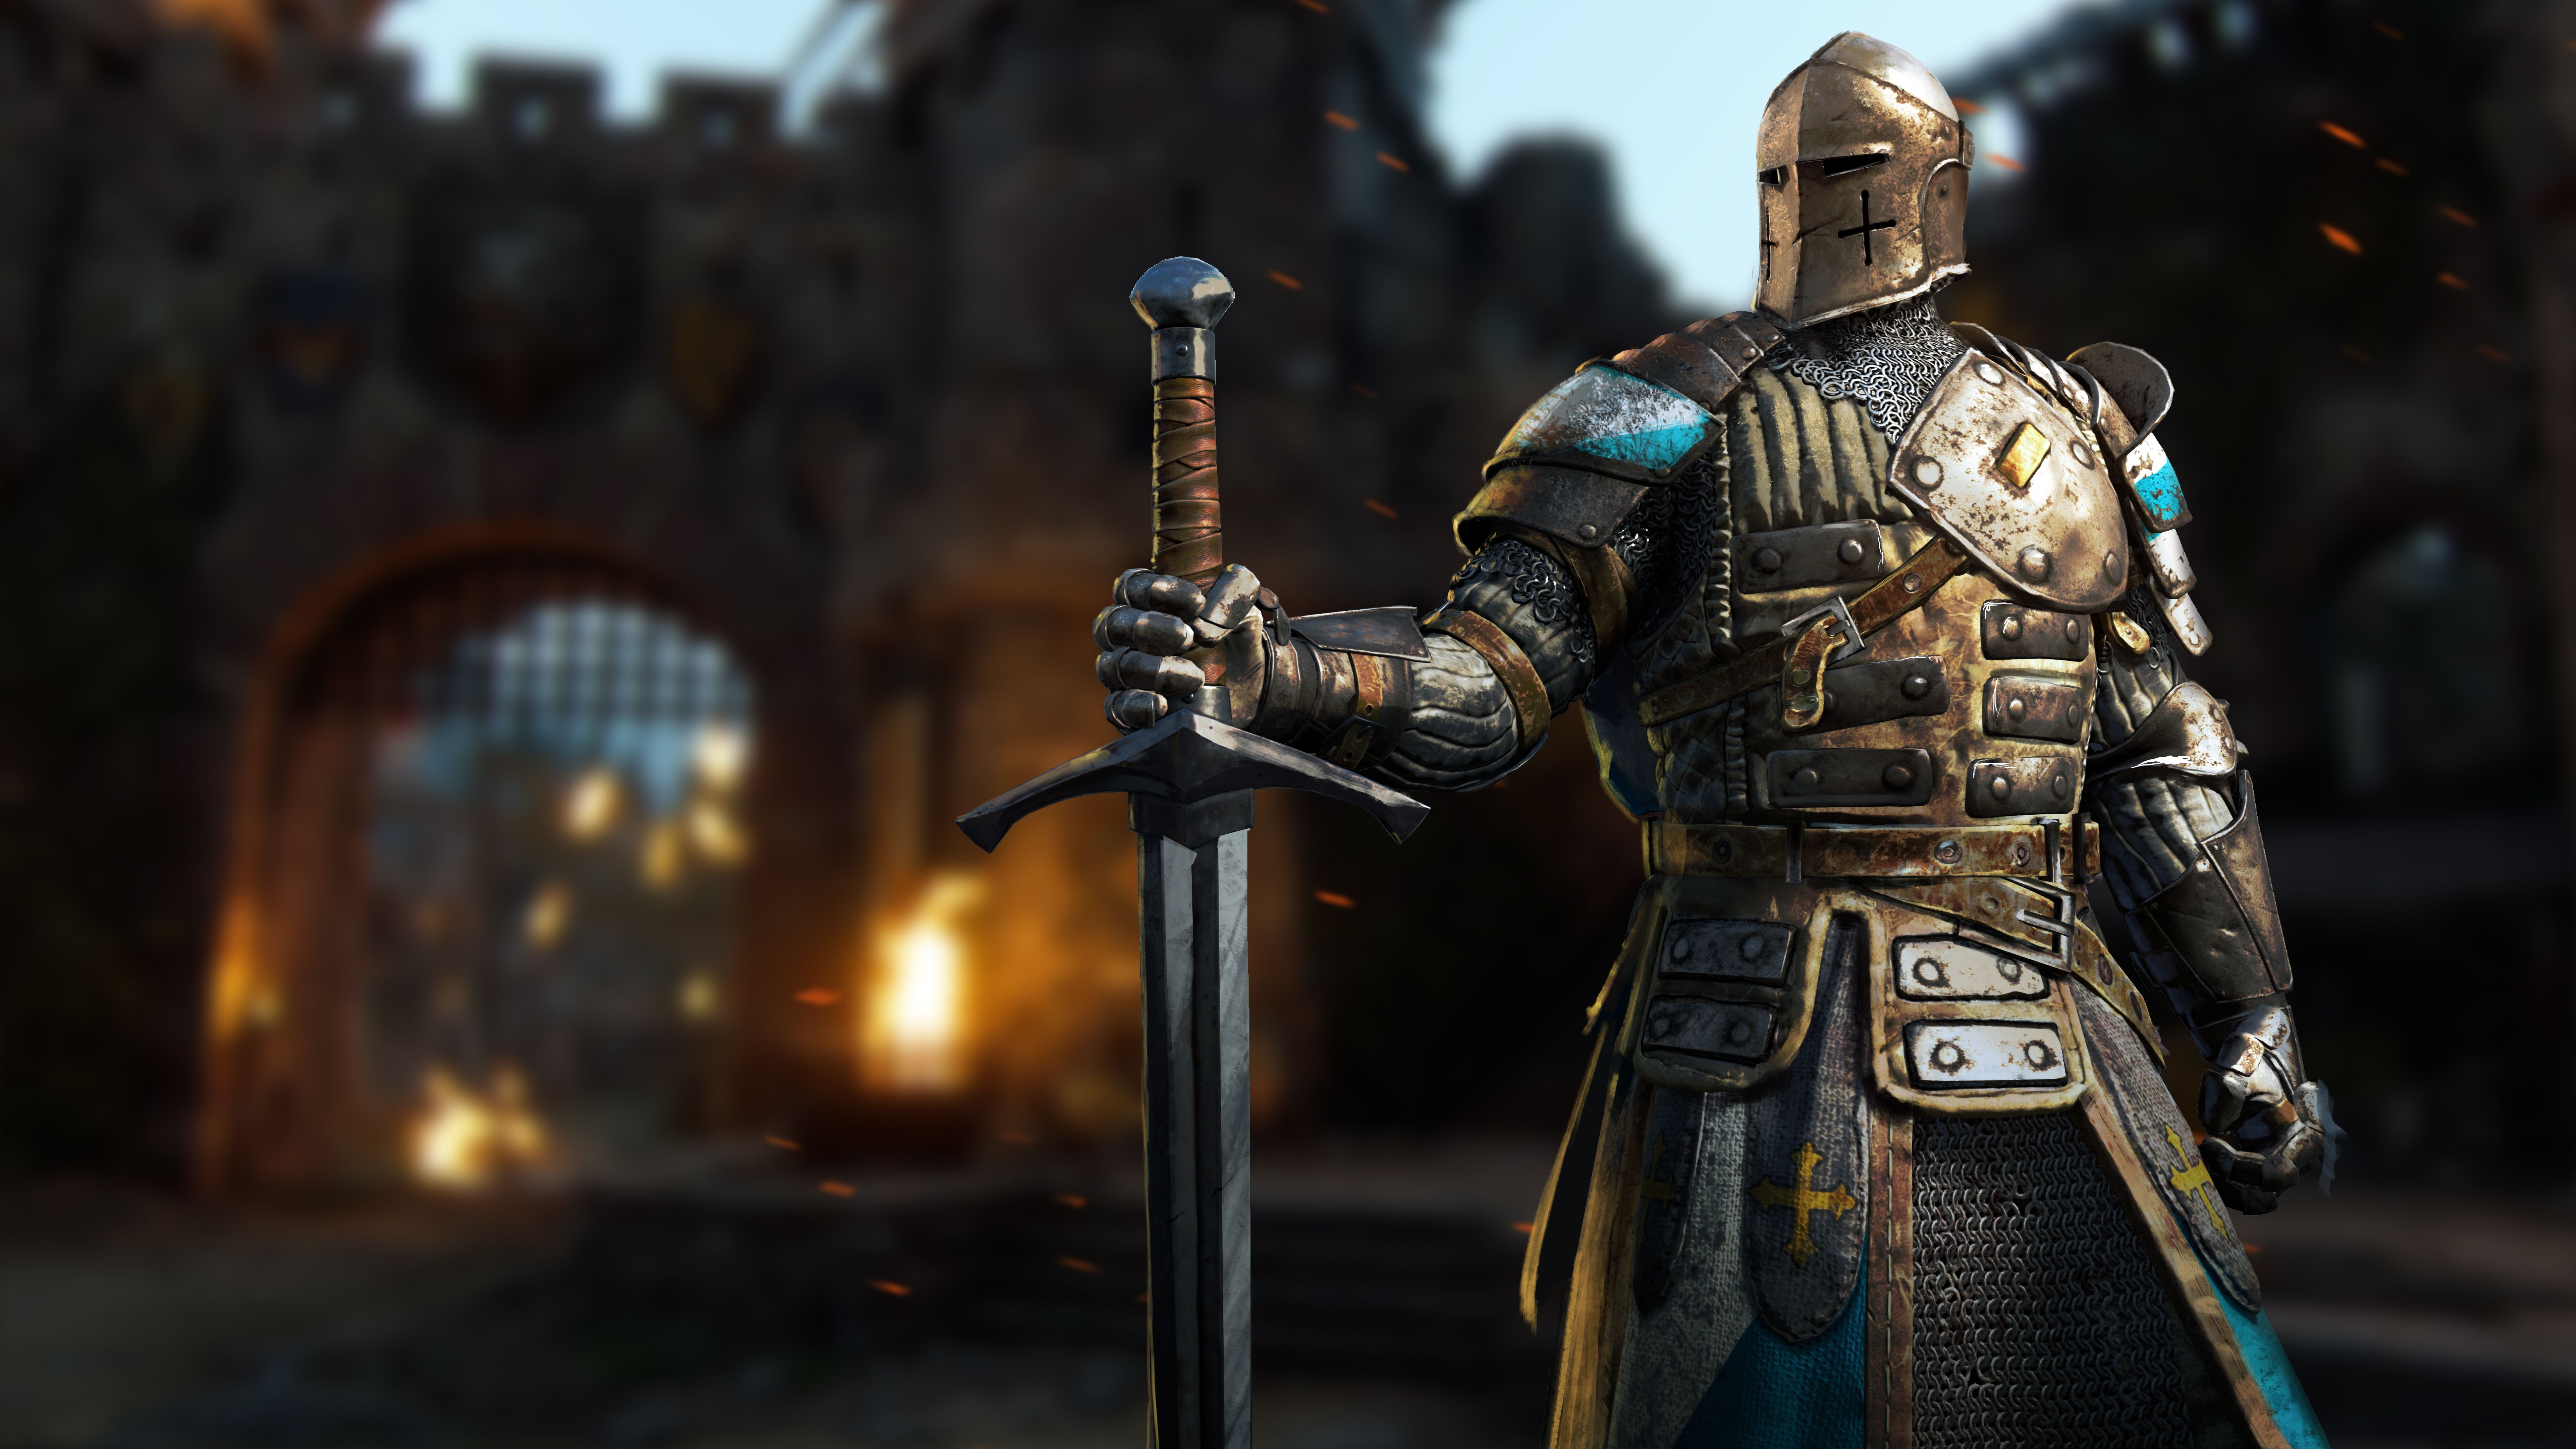 Video Game For Honor 8k Ultra HD Wallpaper